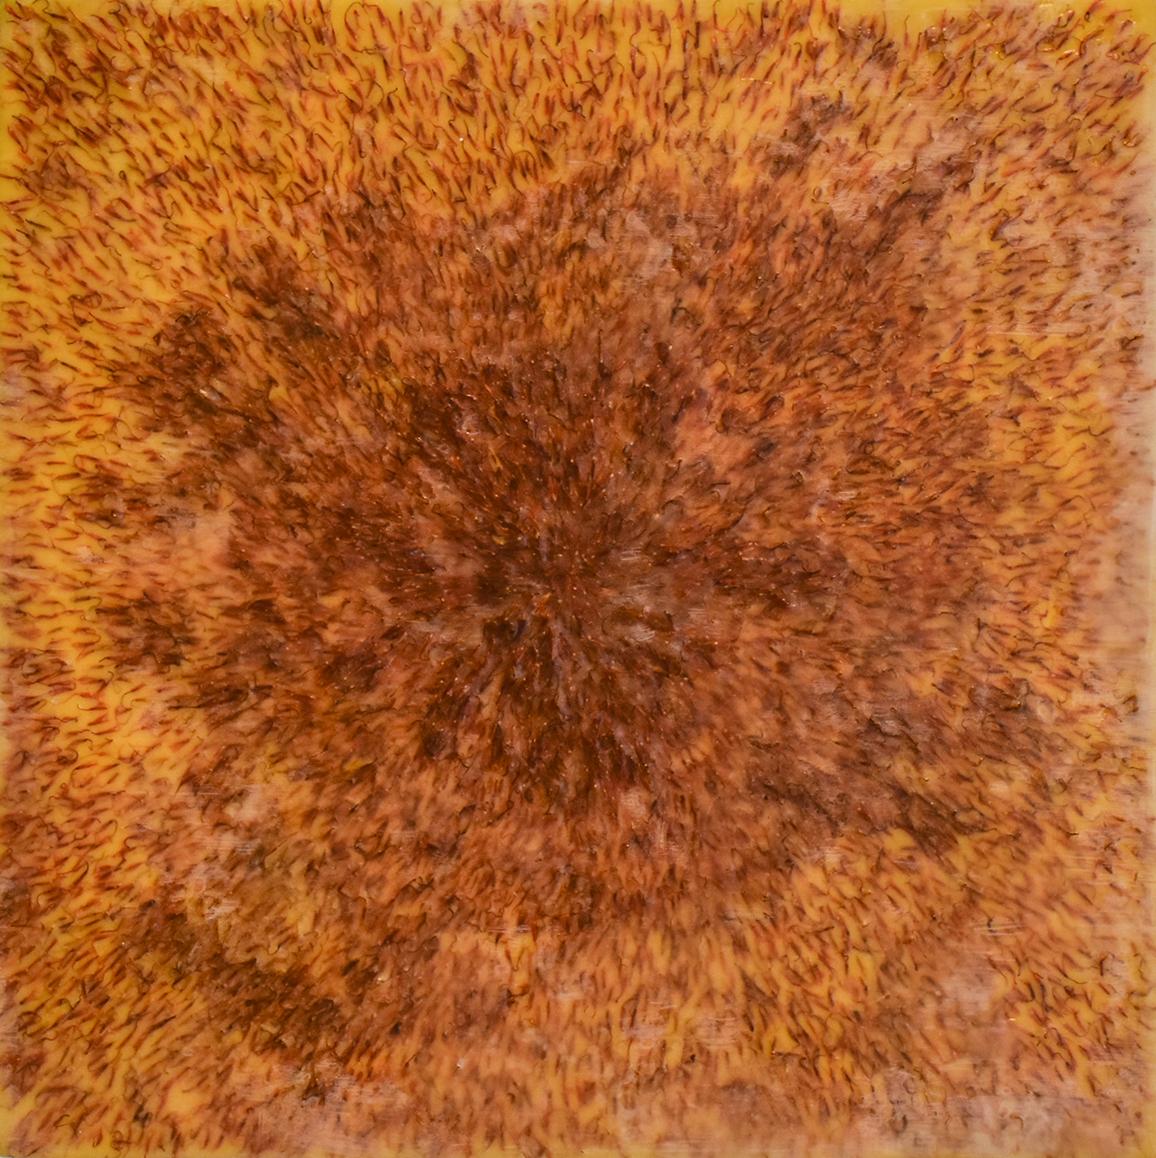 Safflower: Abstract Blood Orange Encaustic Painting on Panel with Saffron Fibers - Mixed Media Art by Allyson Levy